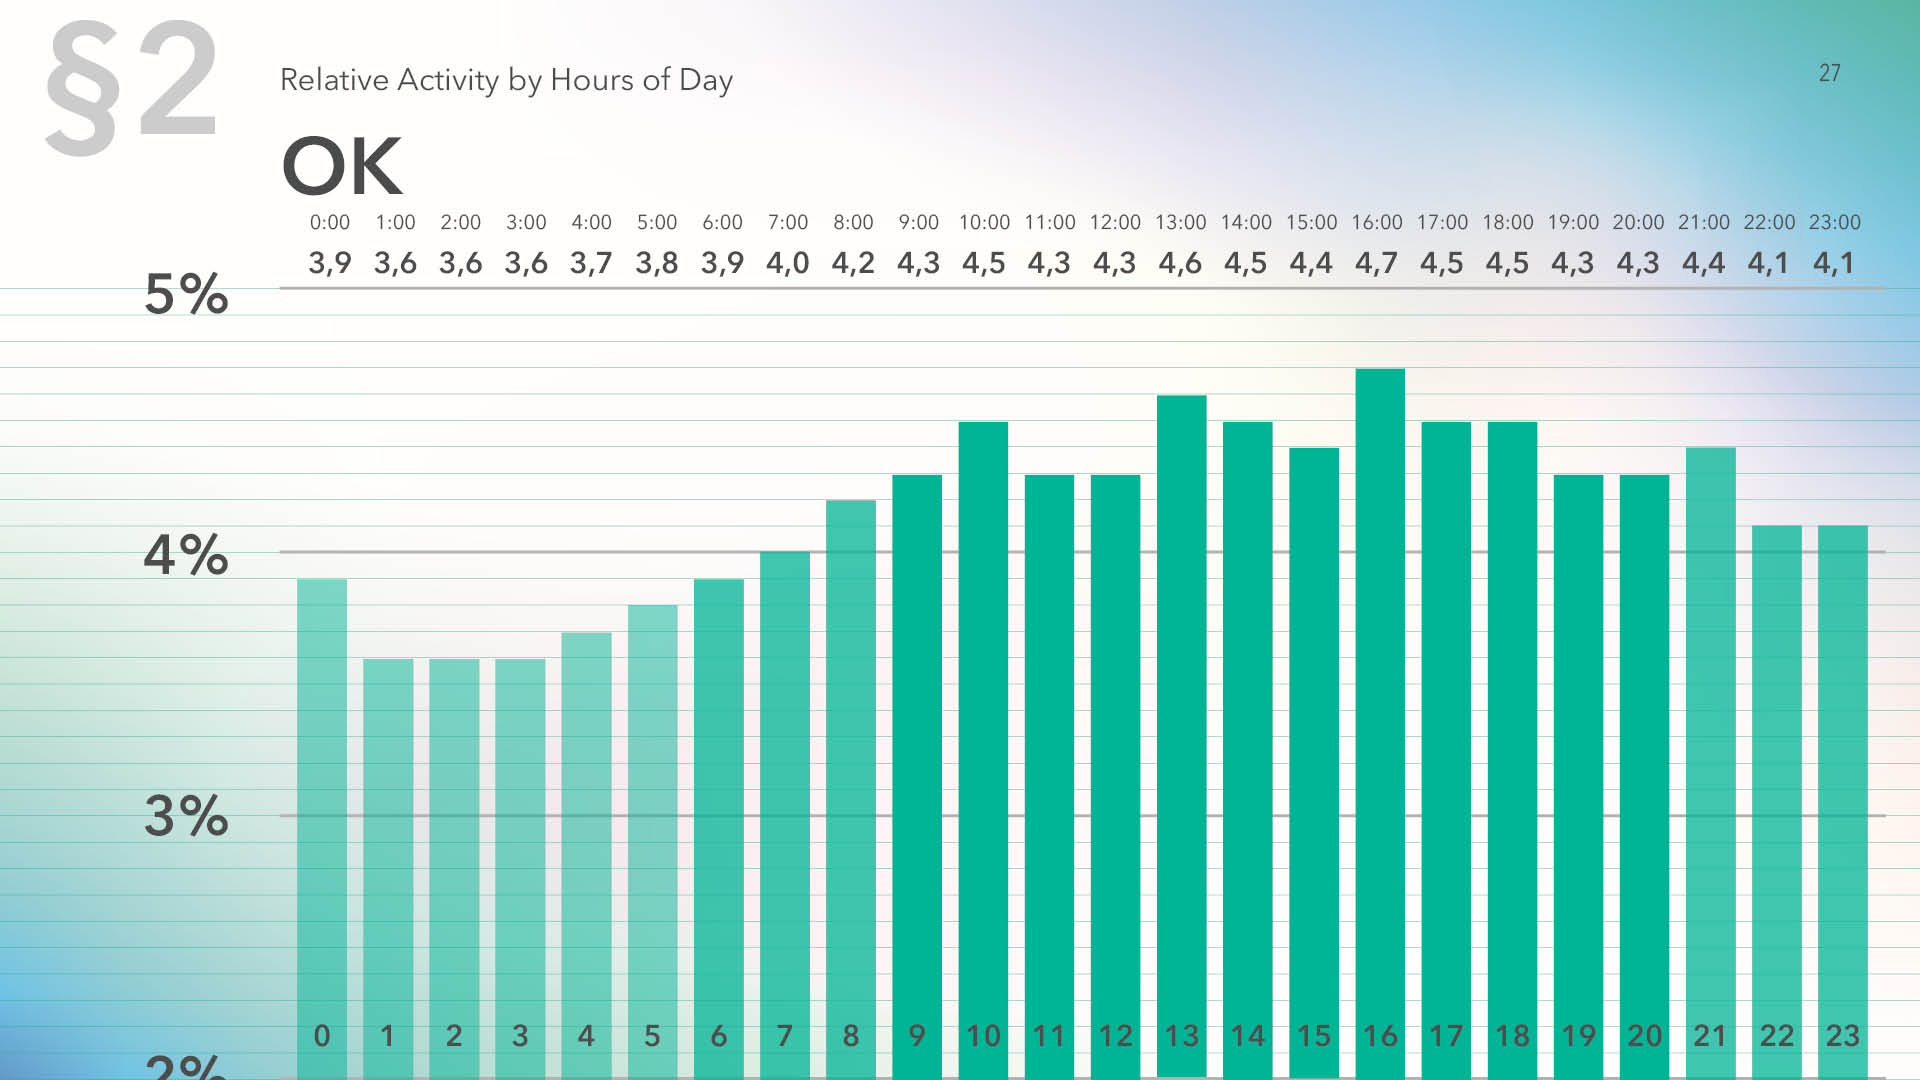 Relative audience activity on OK by hour of the day, 2019